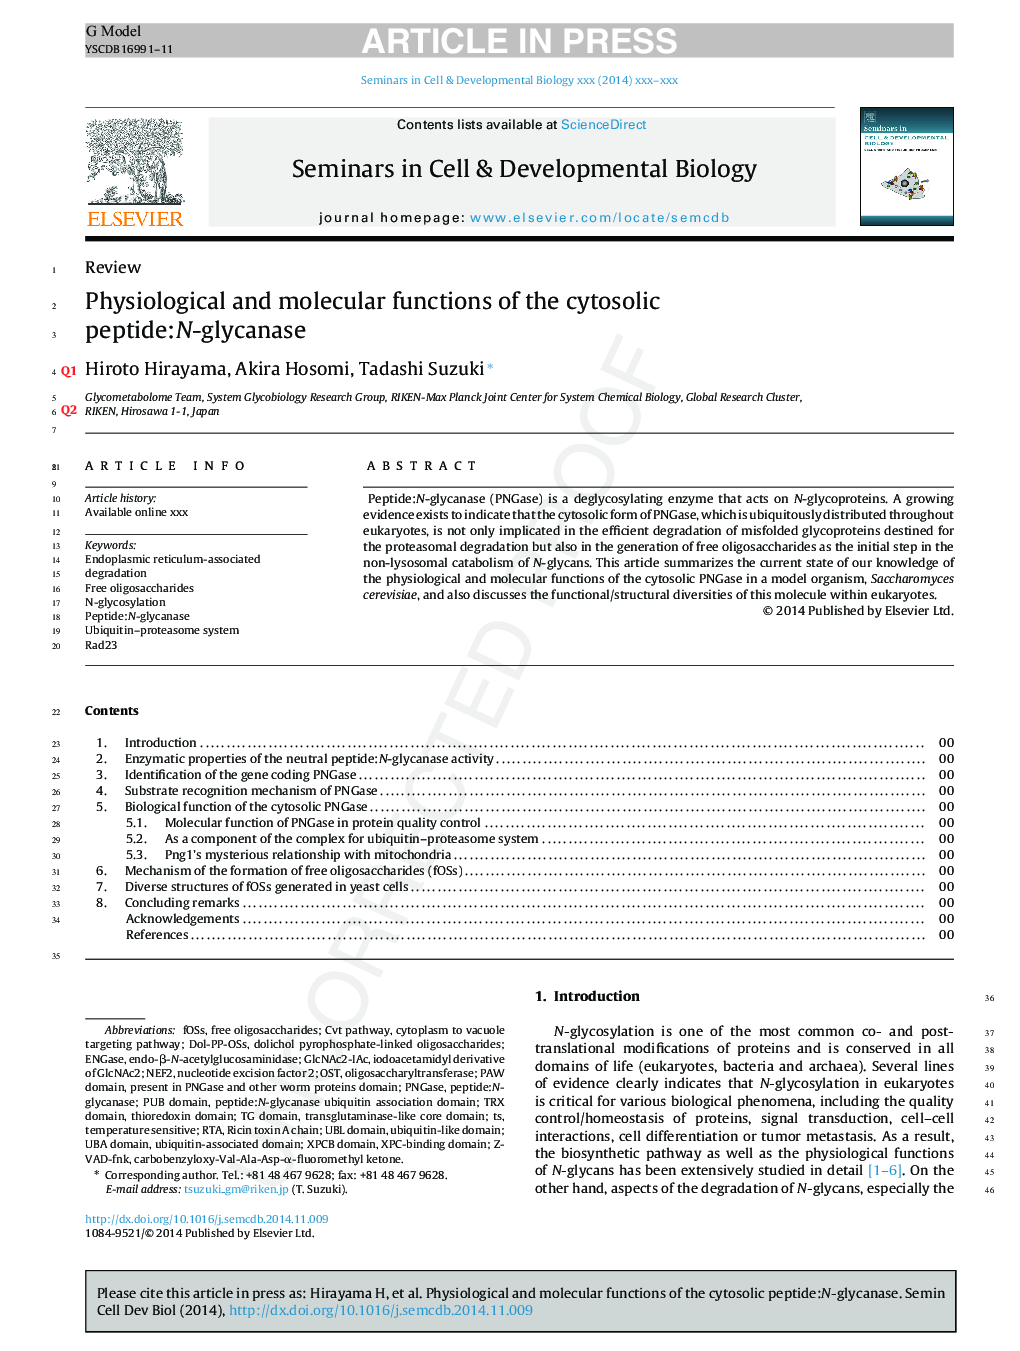 Physiological and molecular functions of the cytosolic peptide:N-glycanase